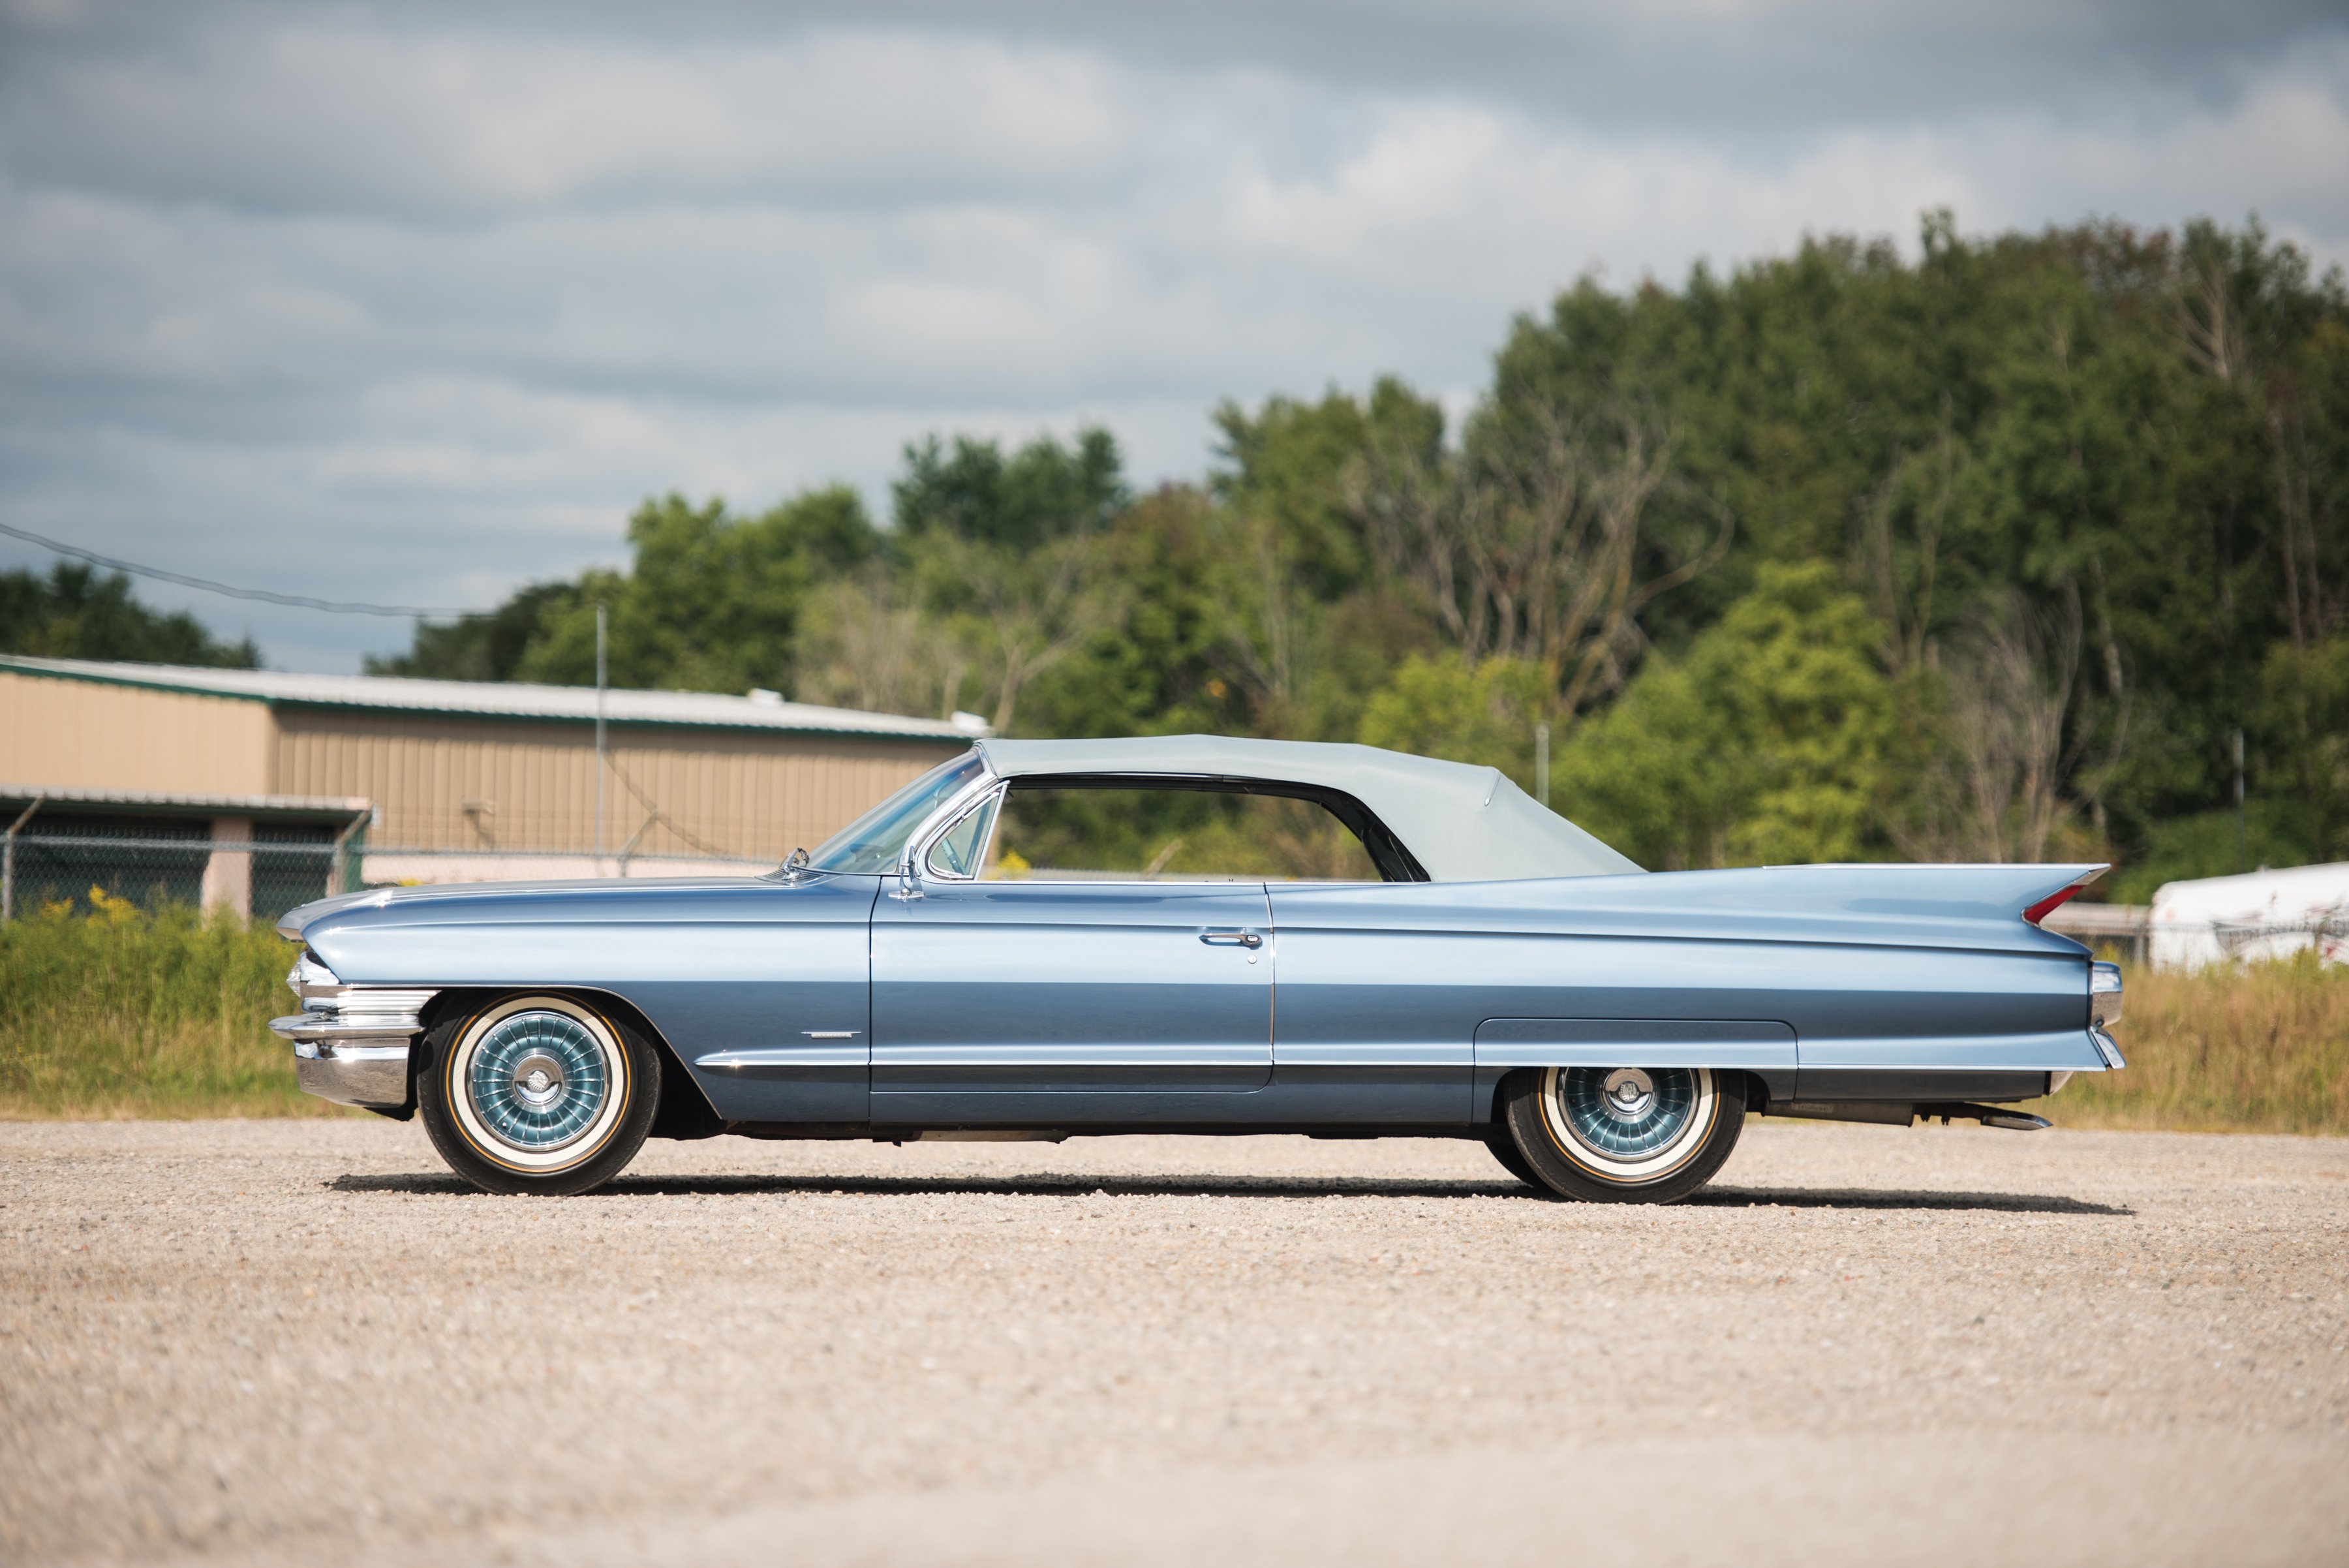 1961, Cadillac, Sixty two, Convertible, 6267f, Luxury, Classic Wallpaper